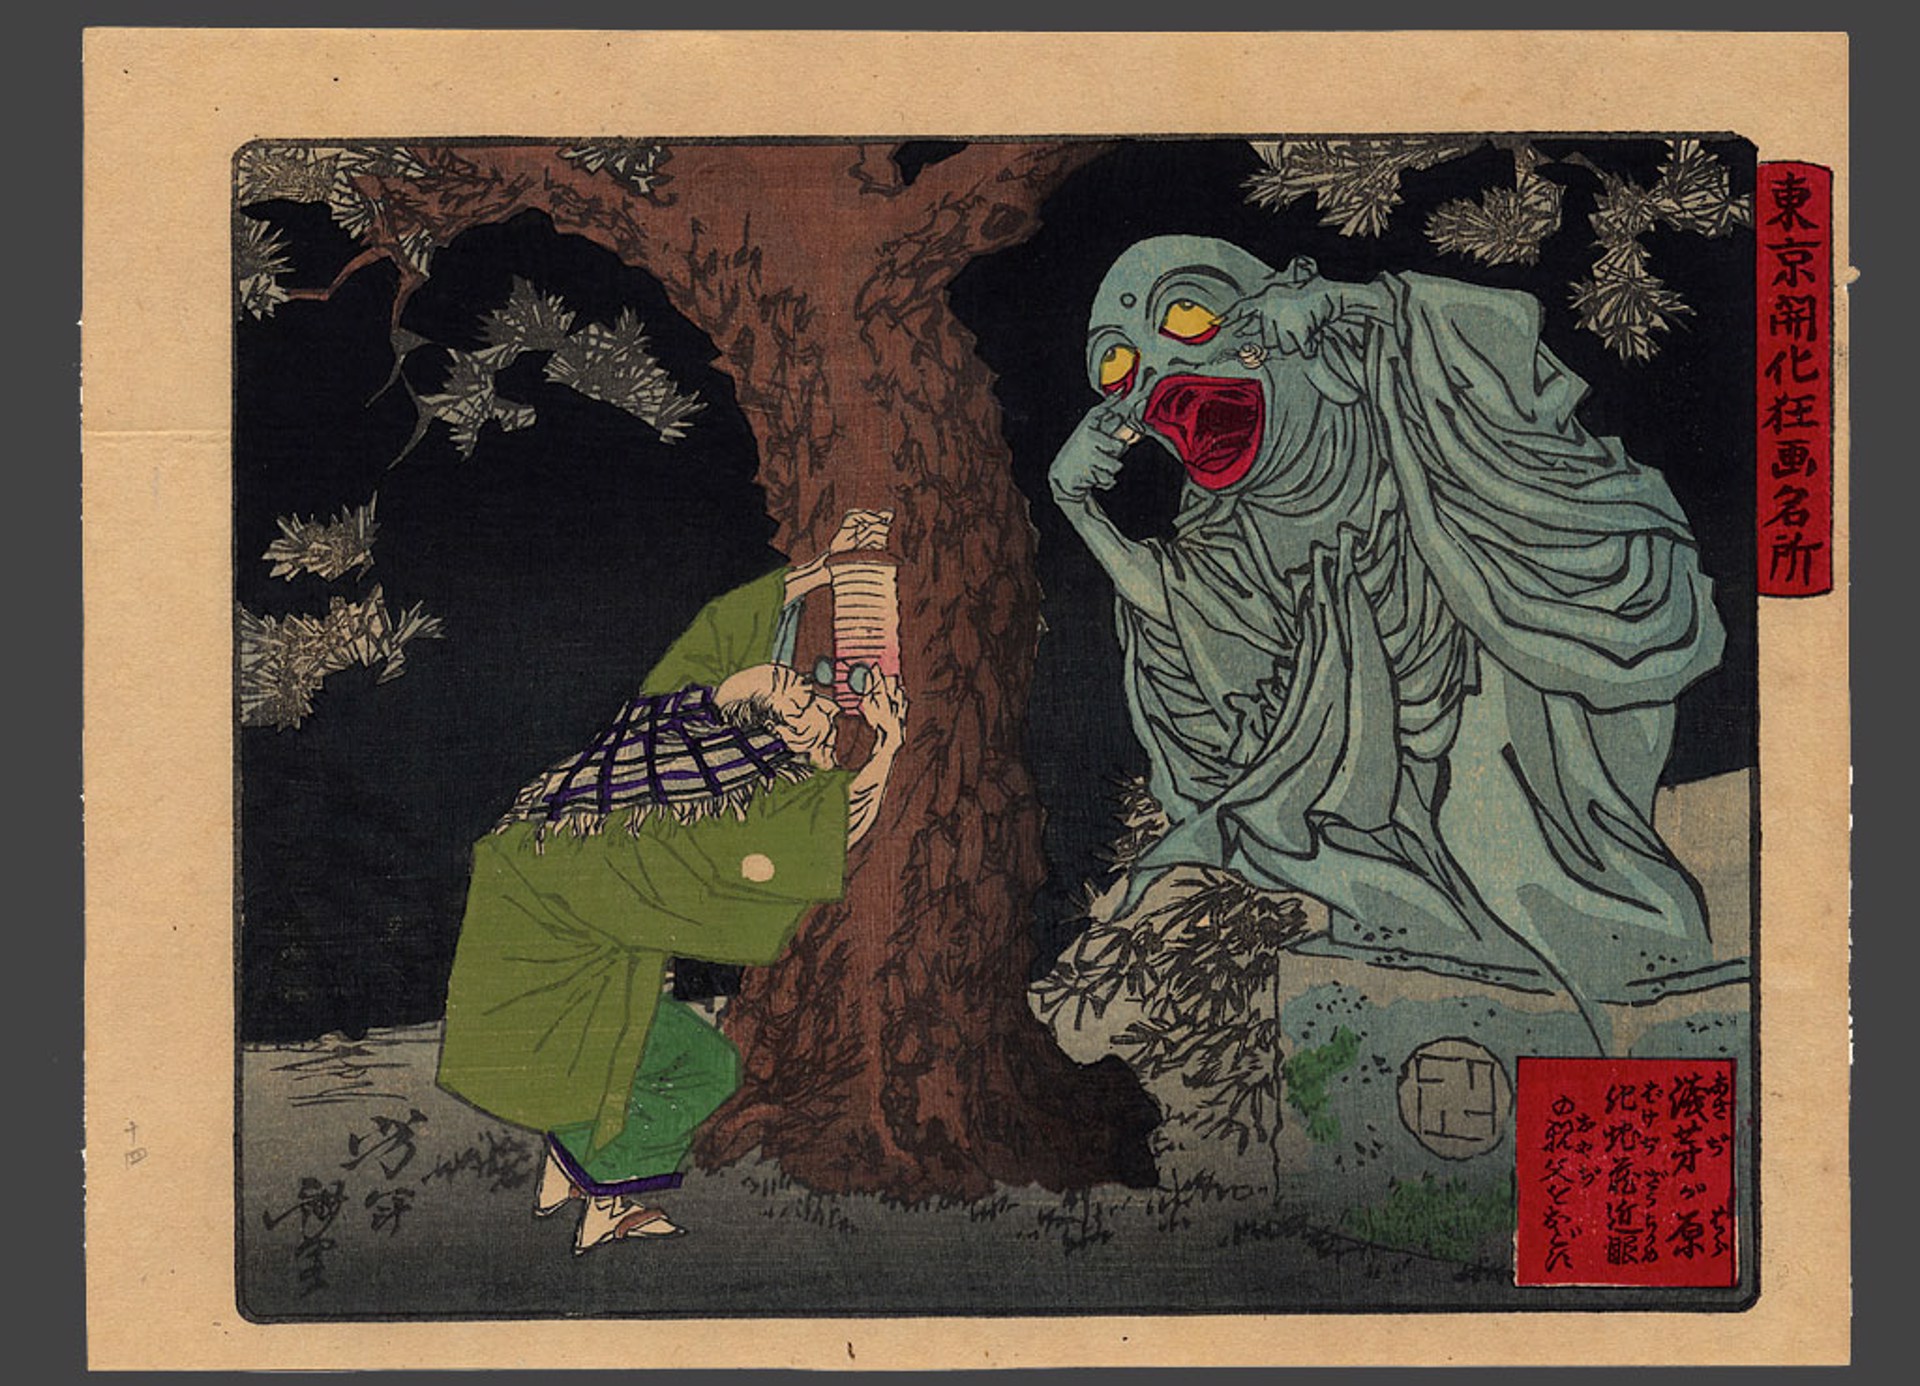 The ghost of Jizo frightens a nearsighted old man at Adachigahara Comic pictures of famous places amid the civiization of Tokyo by Yoshitoshi